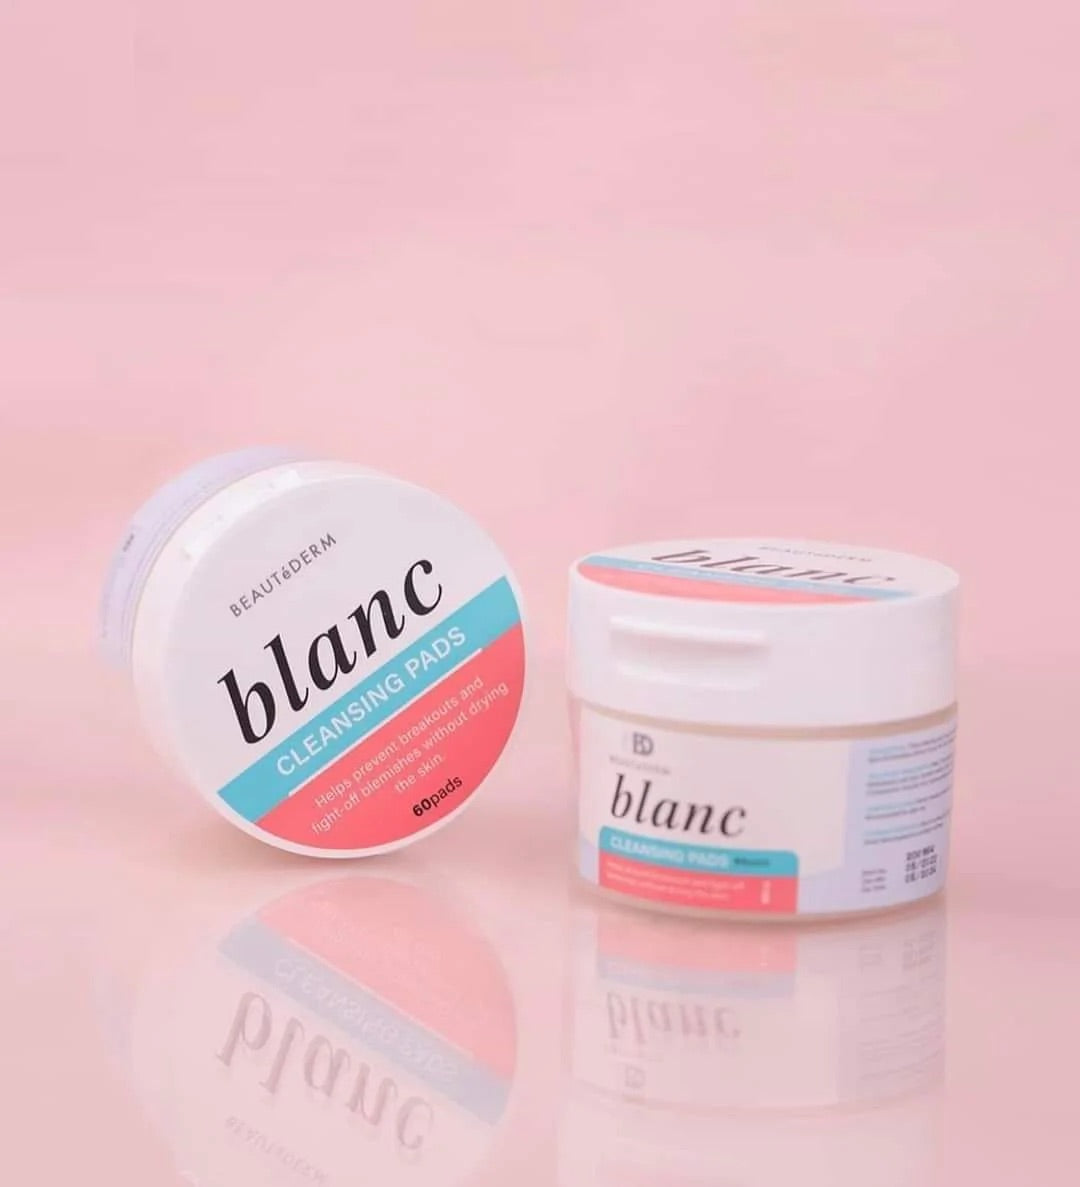 Blanc Cleansing Pads